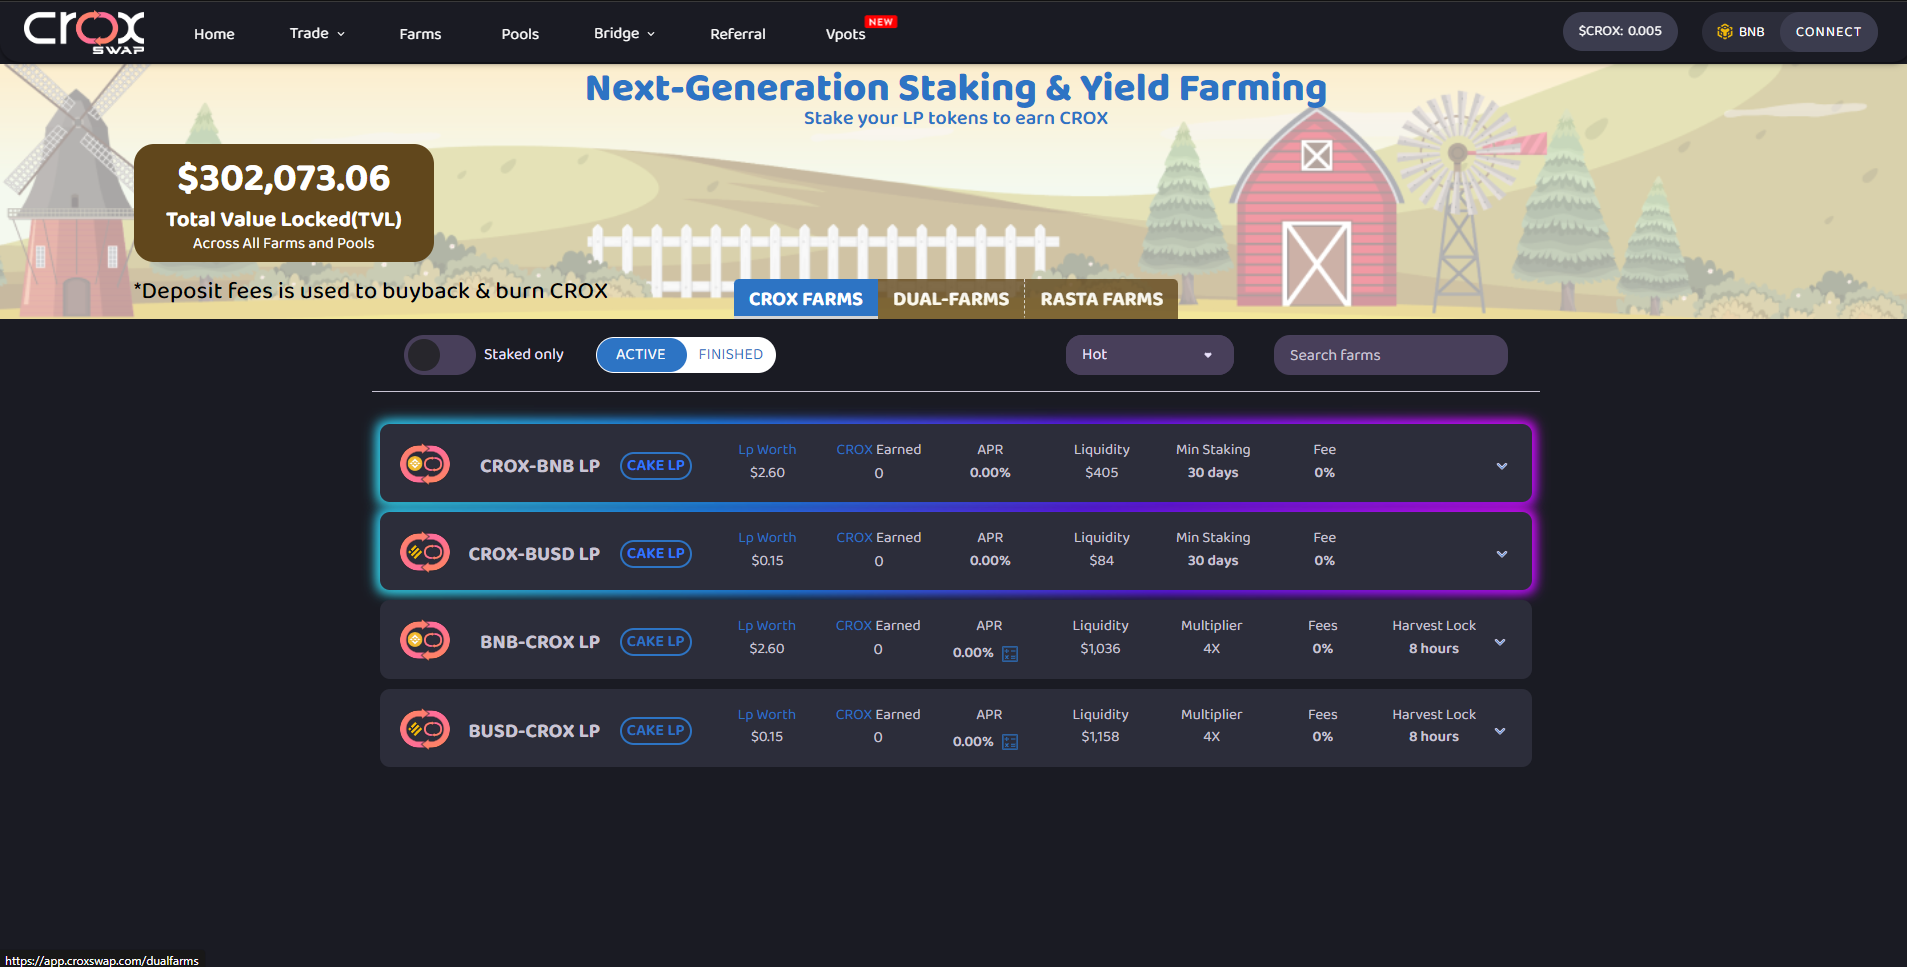 {QE ) A Sr Pry

C7

Next-Generation Staking & Yield Farming

Stake your LP tokens to earn CROX

$302,073.06

Total Value Locked(TVL)
Across All Farms and Pools.

‘Deposit fees is used to buyback & burn CROX

 

 

 

 

  

 

Rh EL Ll) - RTE NFA EY
@ BUSD-CROX LP EP) Py 0.00% Ph 2 8 hours ~

 

[RY PU